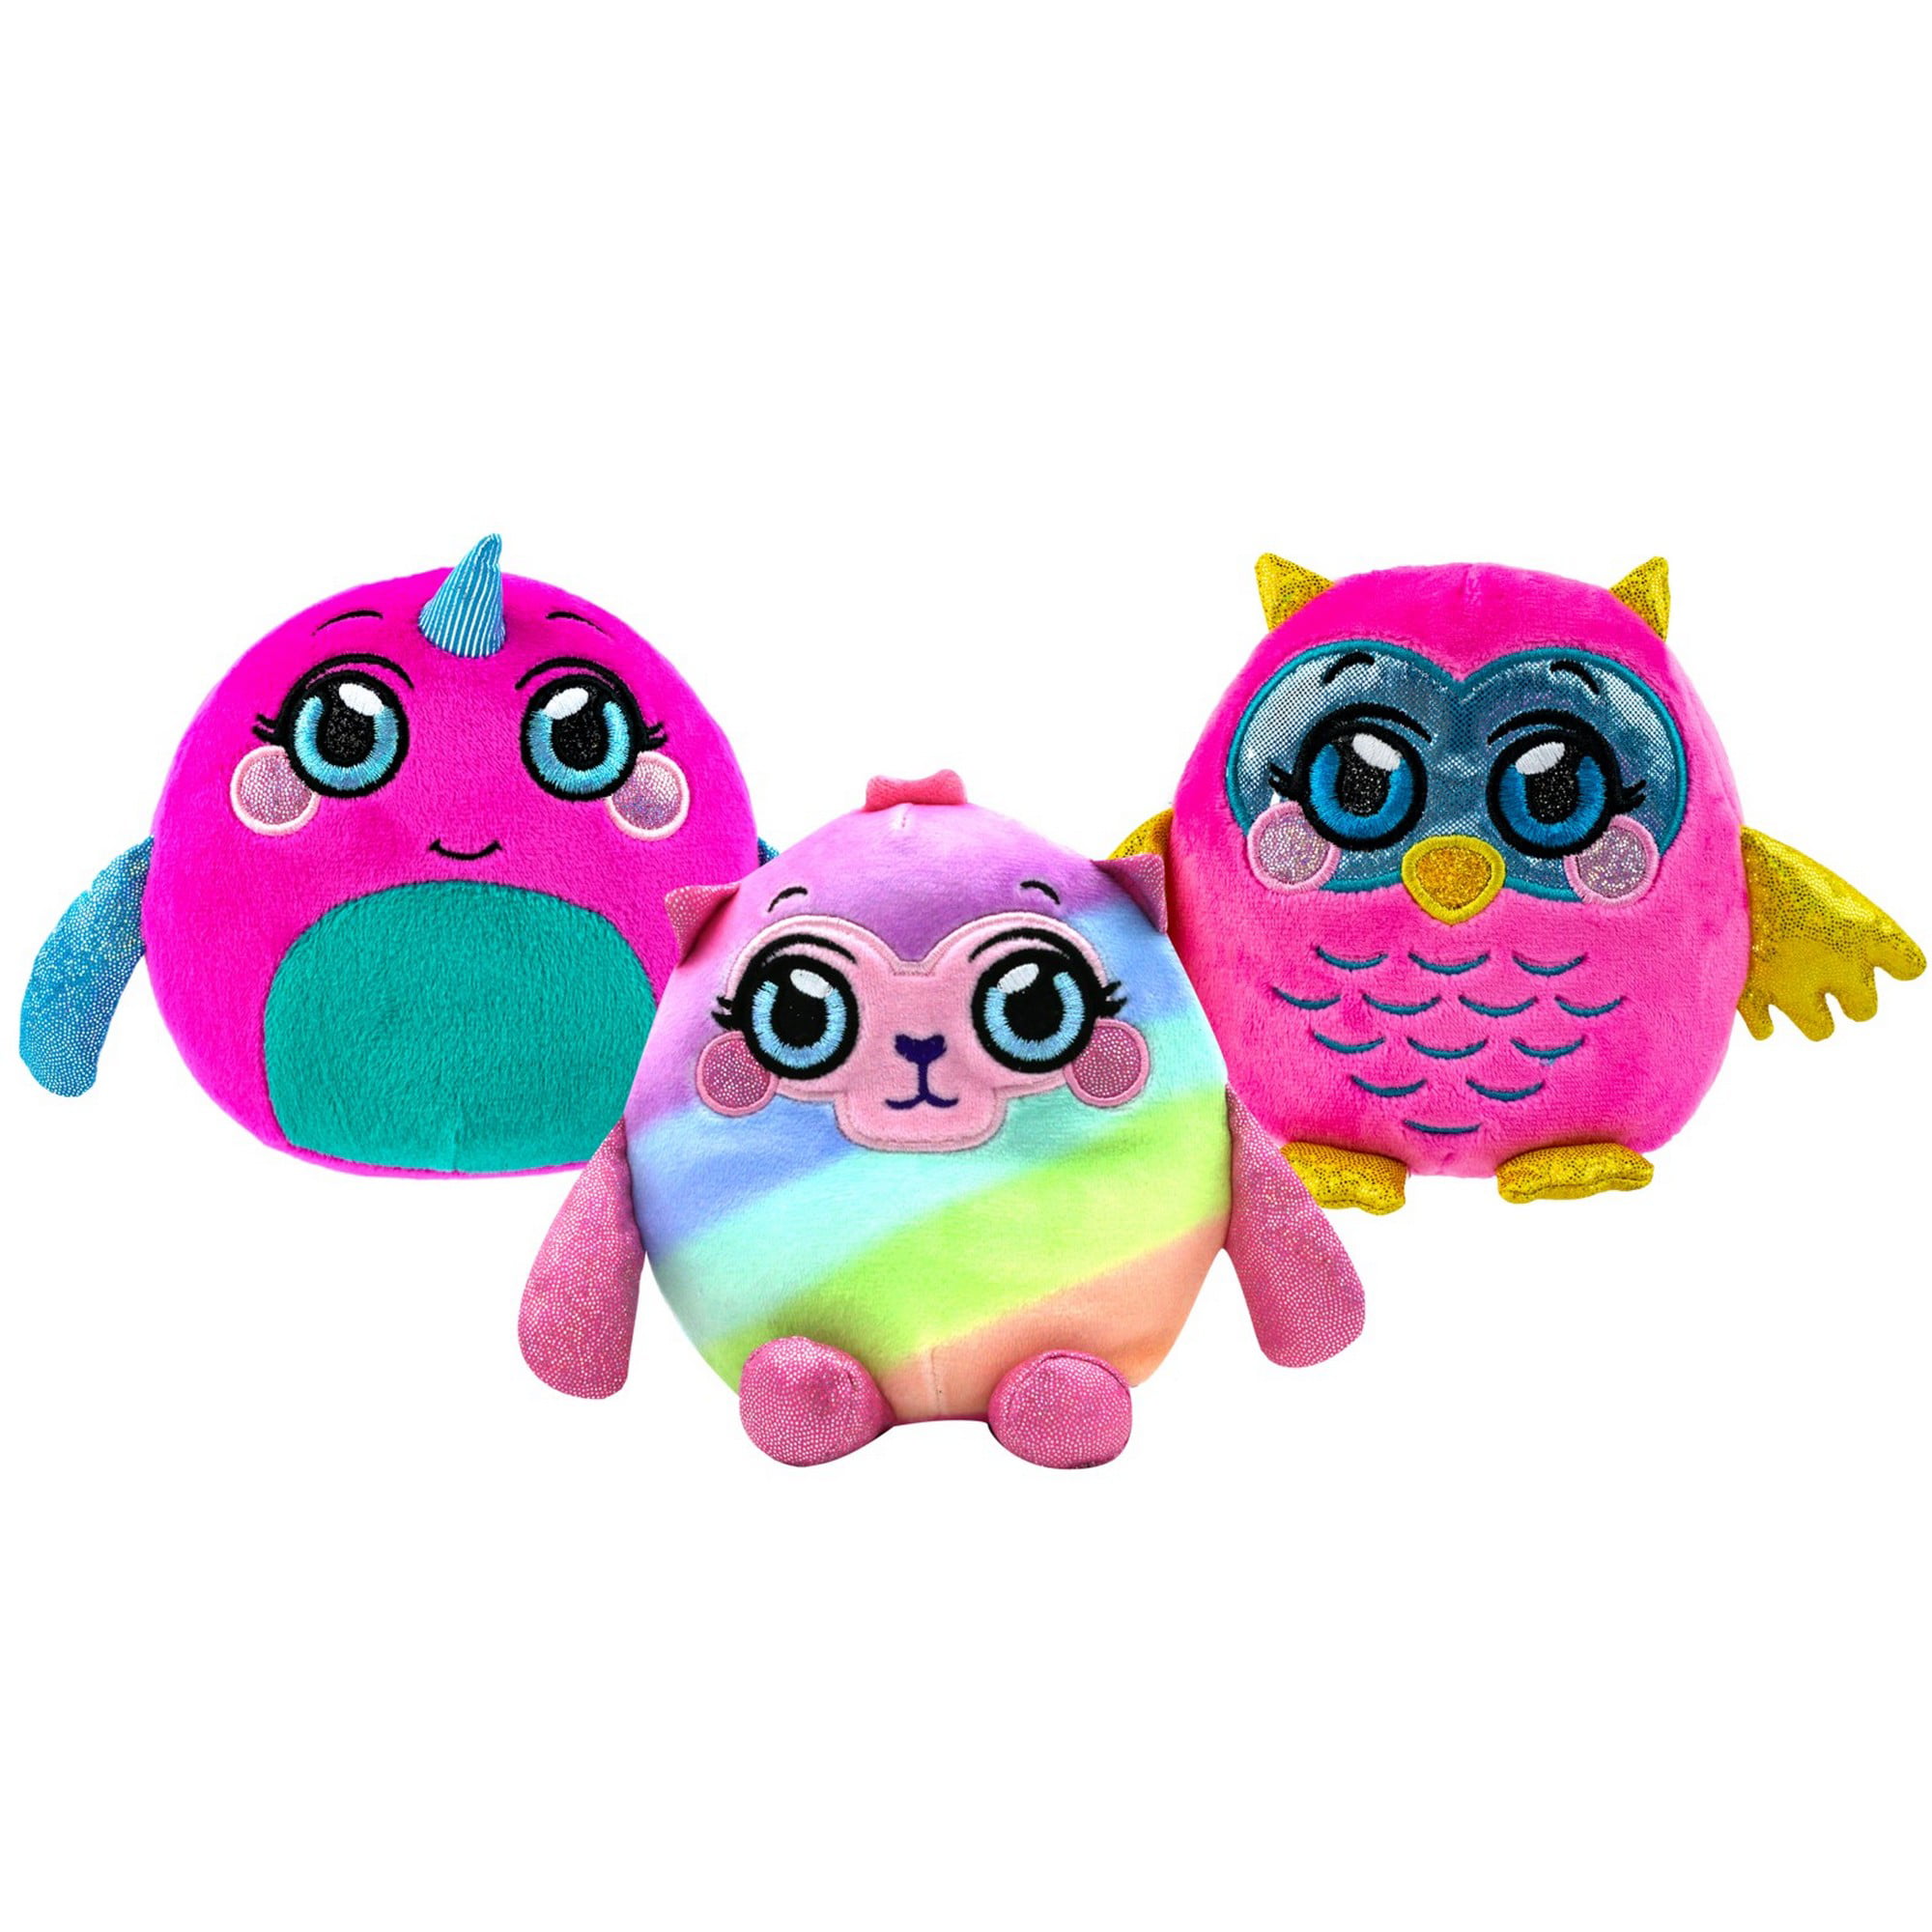 Mush Meez Olivia Owl 6" Squeezy Squishy Moldable Stuffed Plush Collect All 